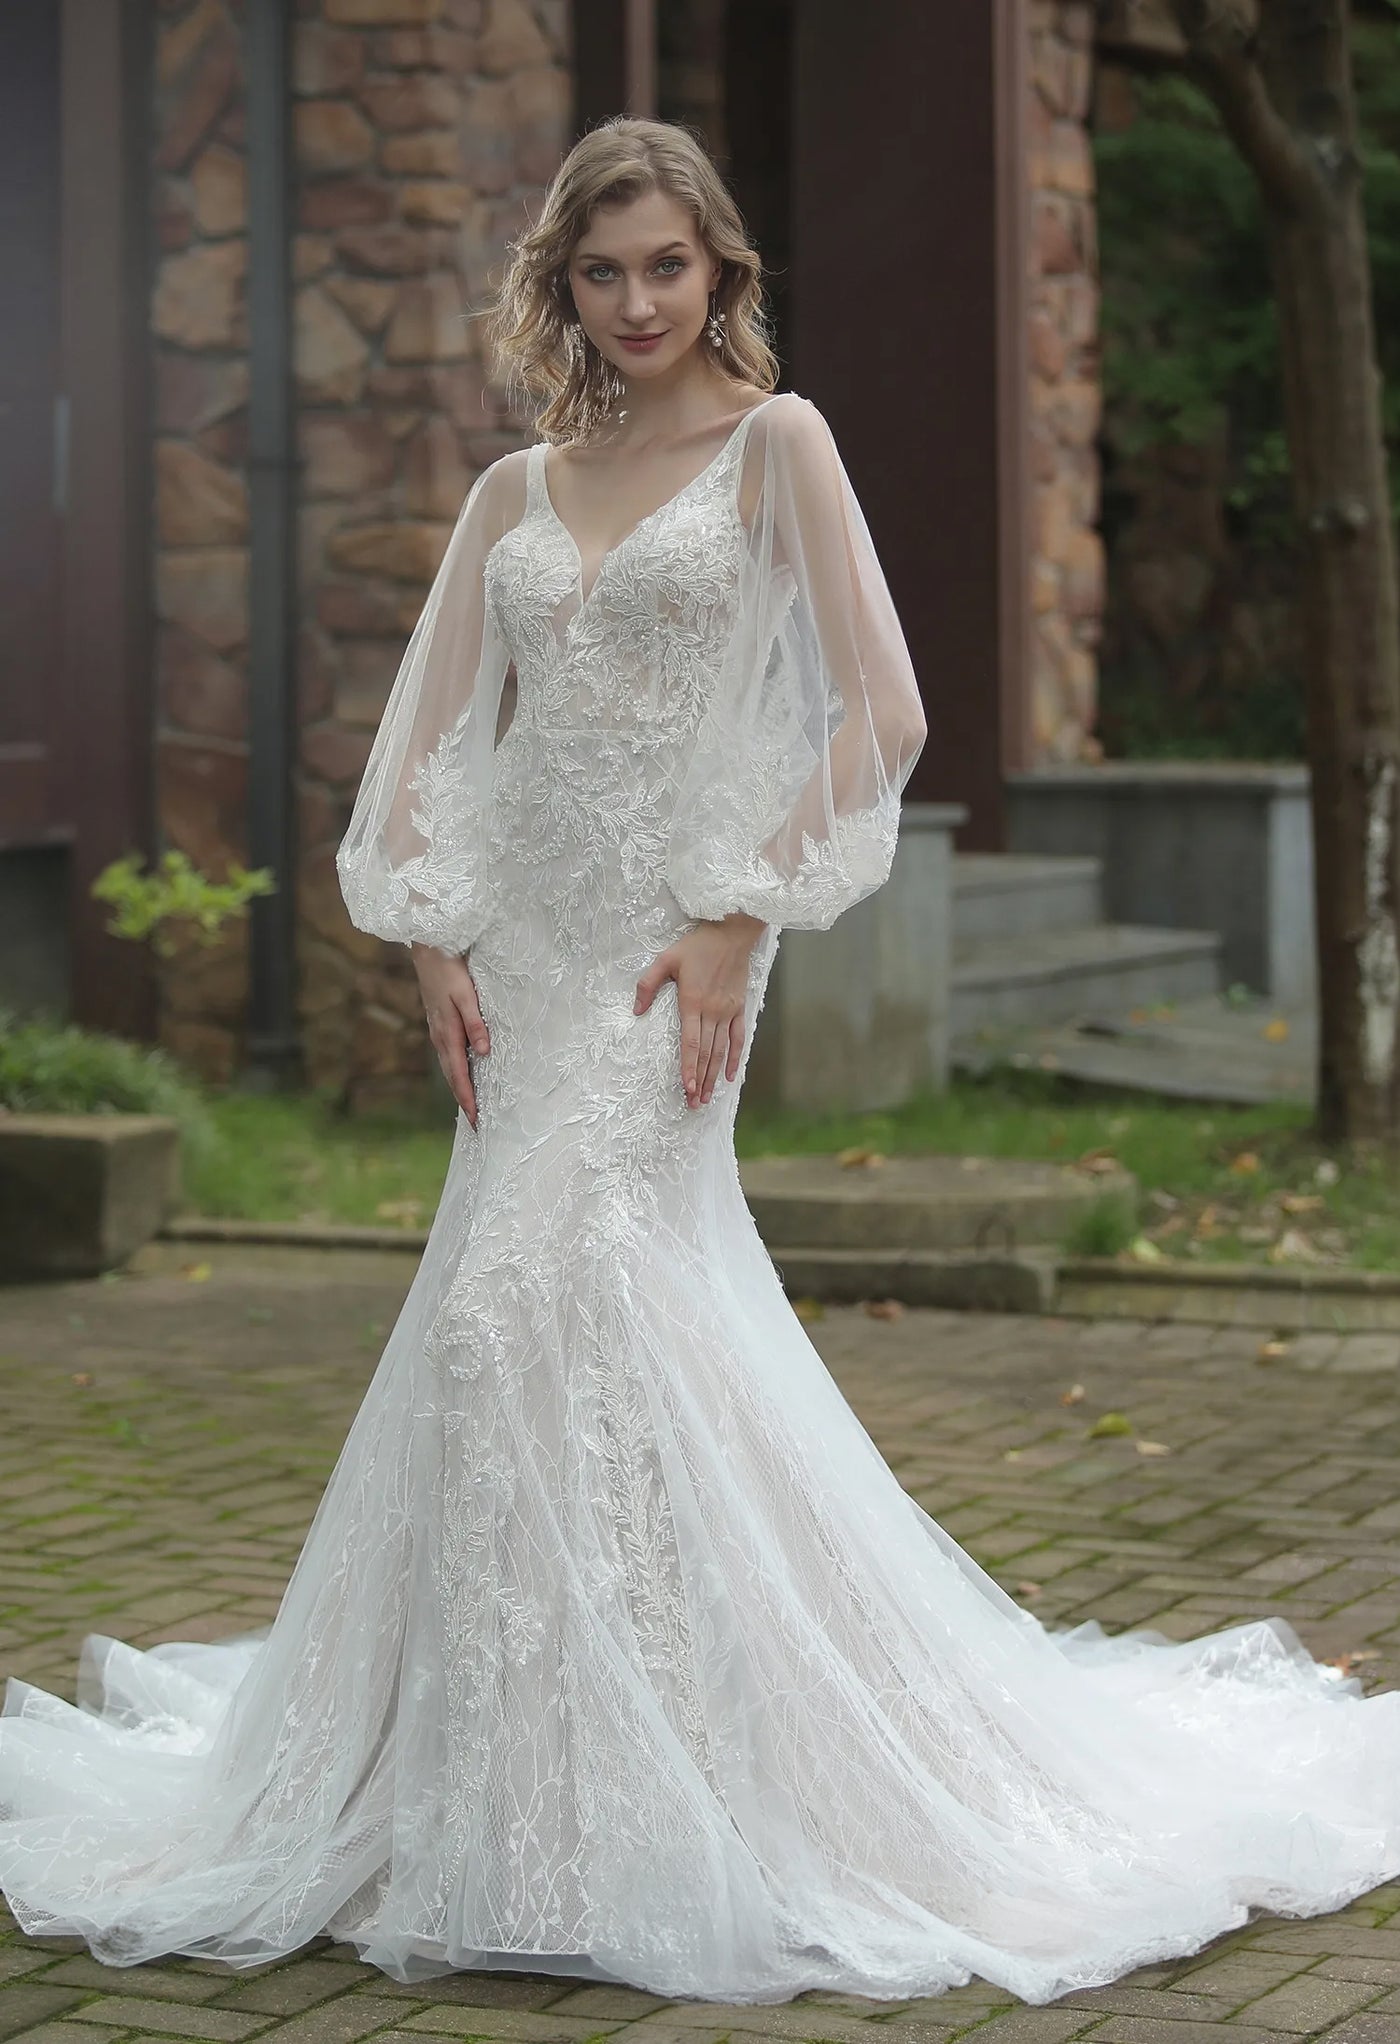 A bride in a Bergamot Bridal Classic V-Neck Allover Lace Fit And Flare Wedding Dress with a v-neckline and sheer sleeves poses outdoors.